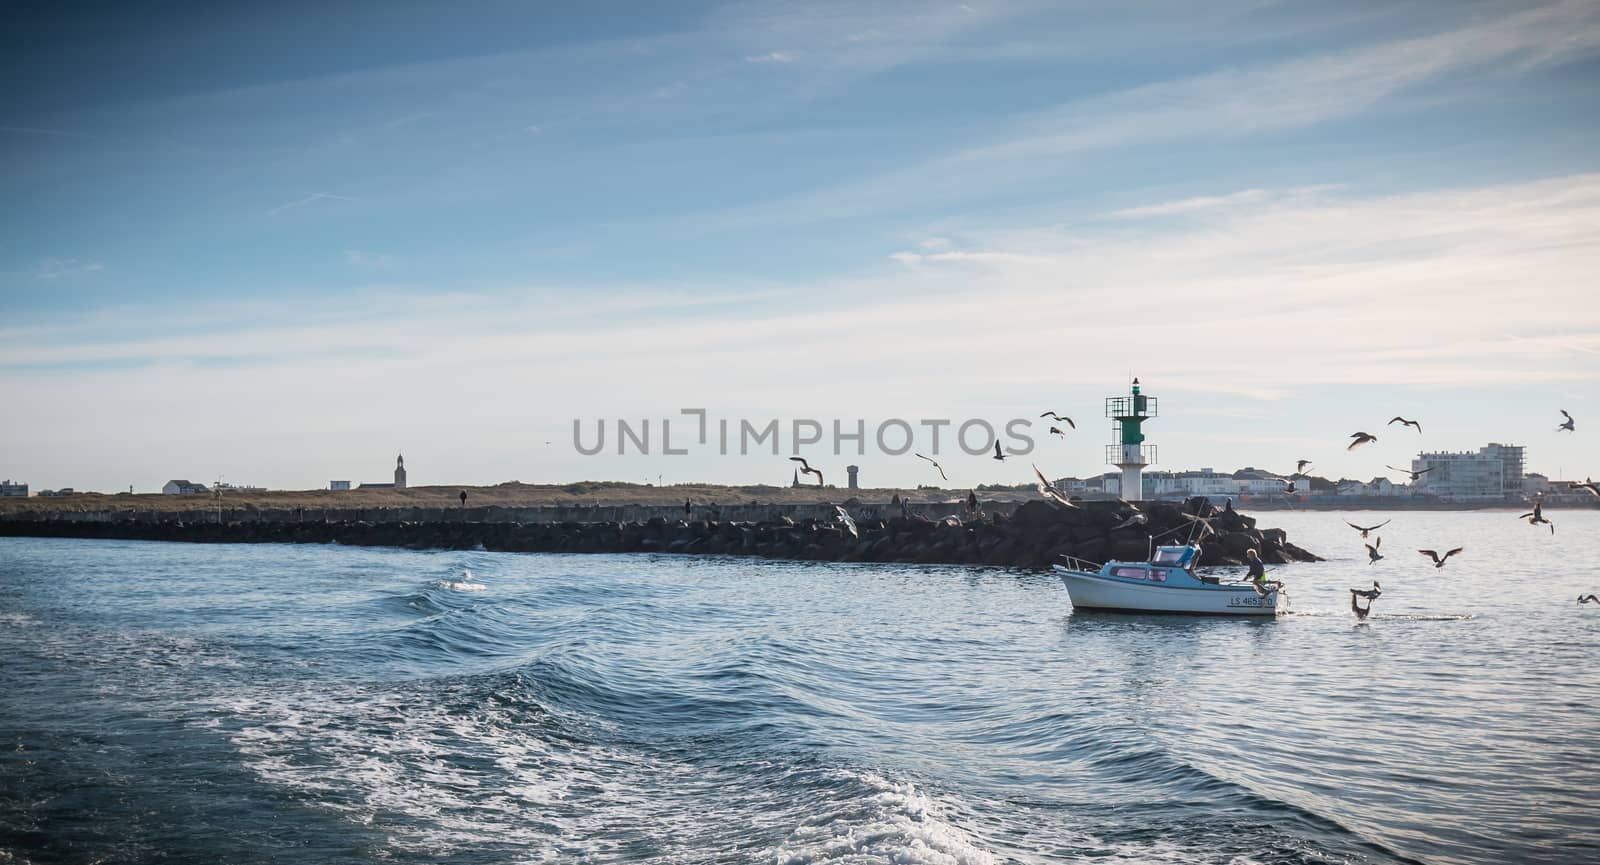 Saint Gilles Croix de Vie, France - September 16, 2018: Small fishing boat entering the harbor accompanied by seagulls on a summer day